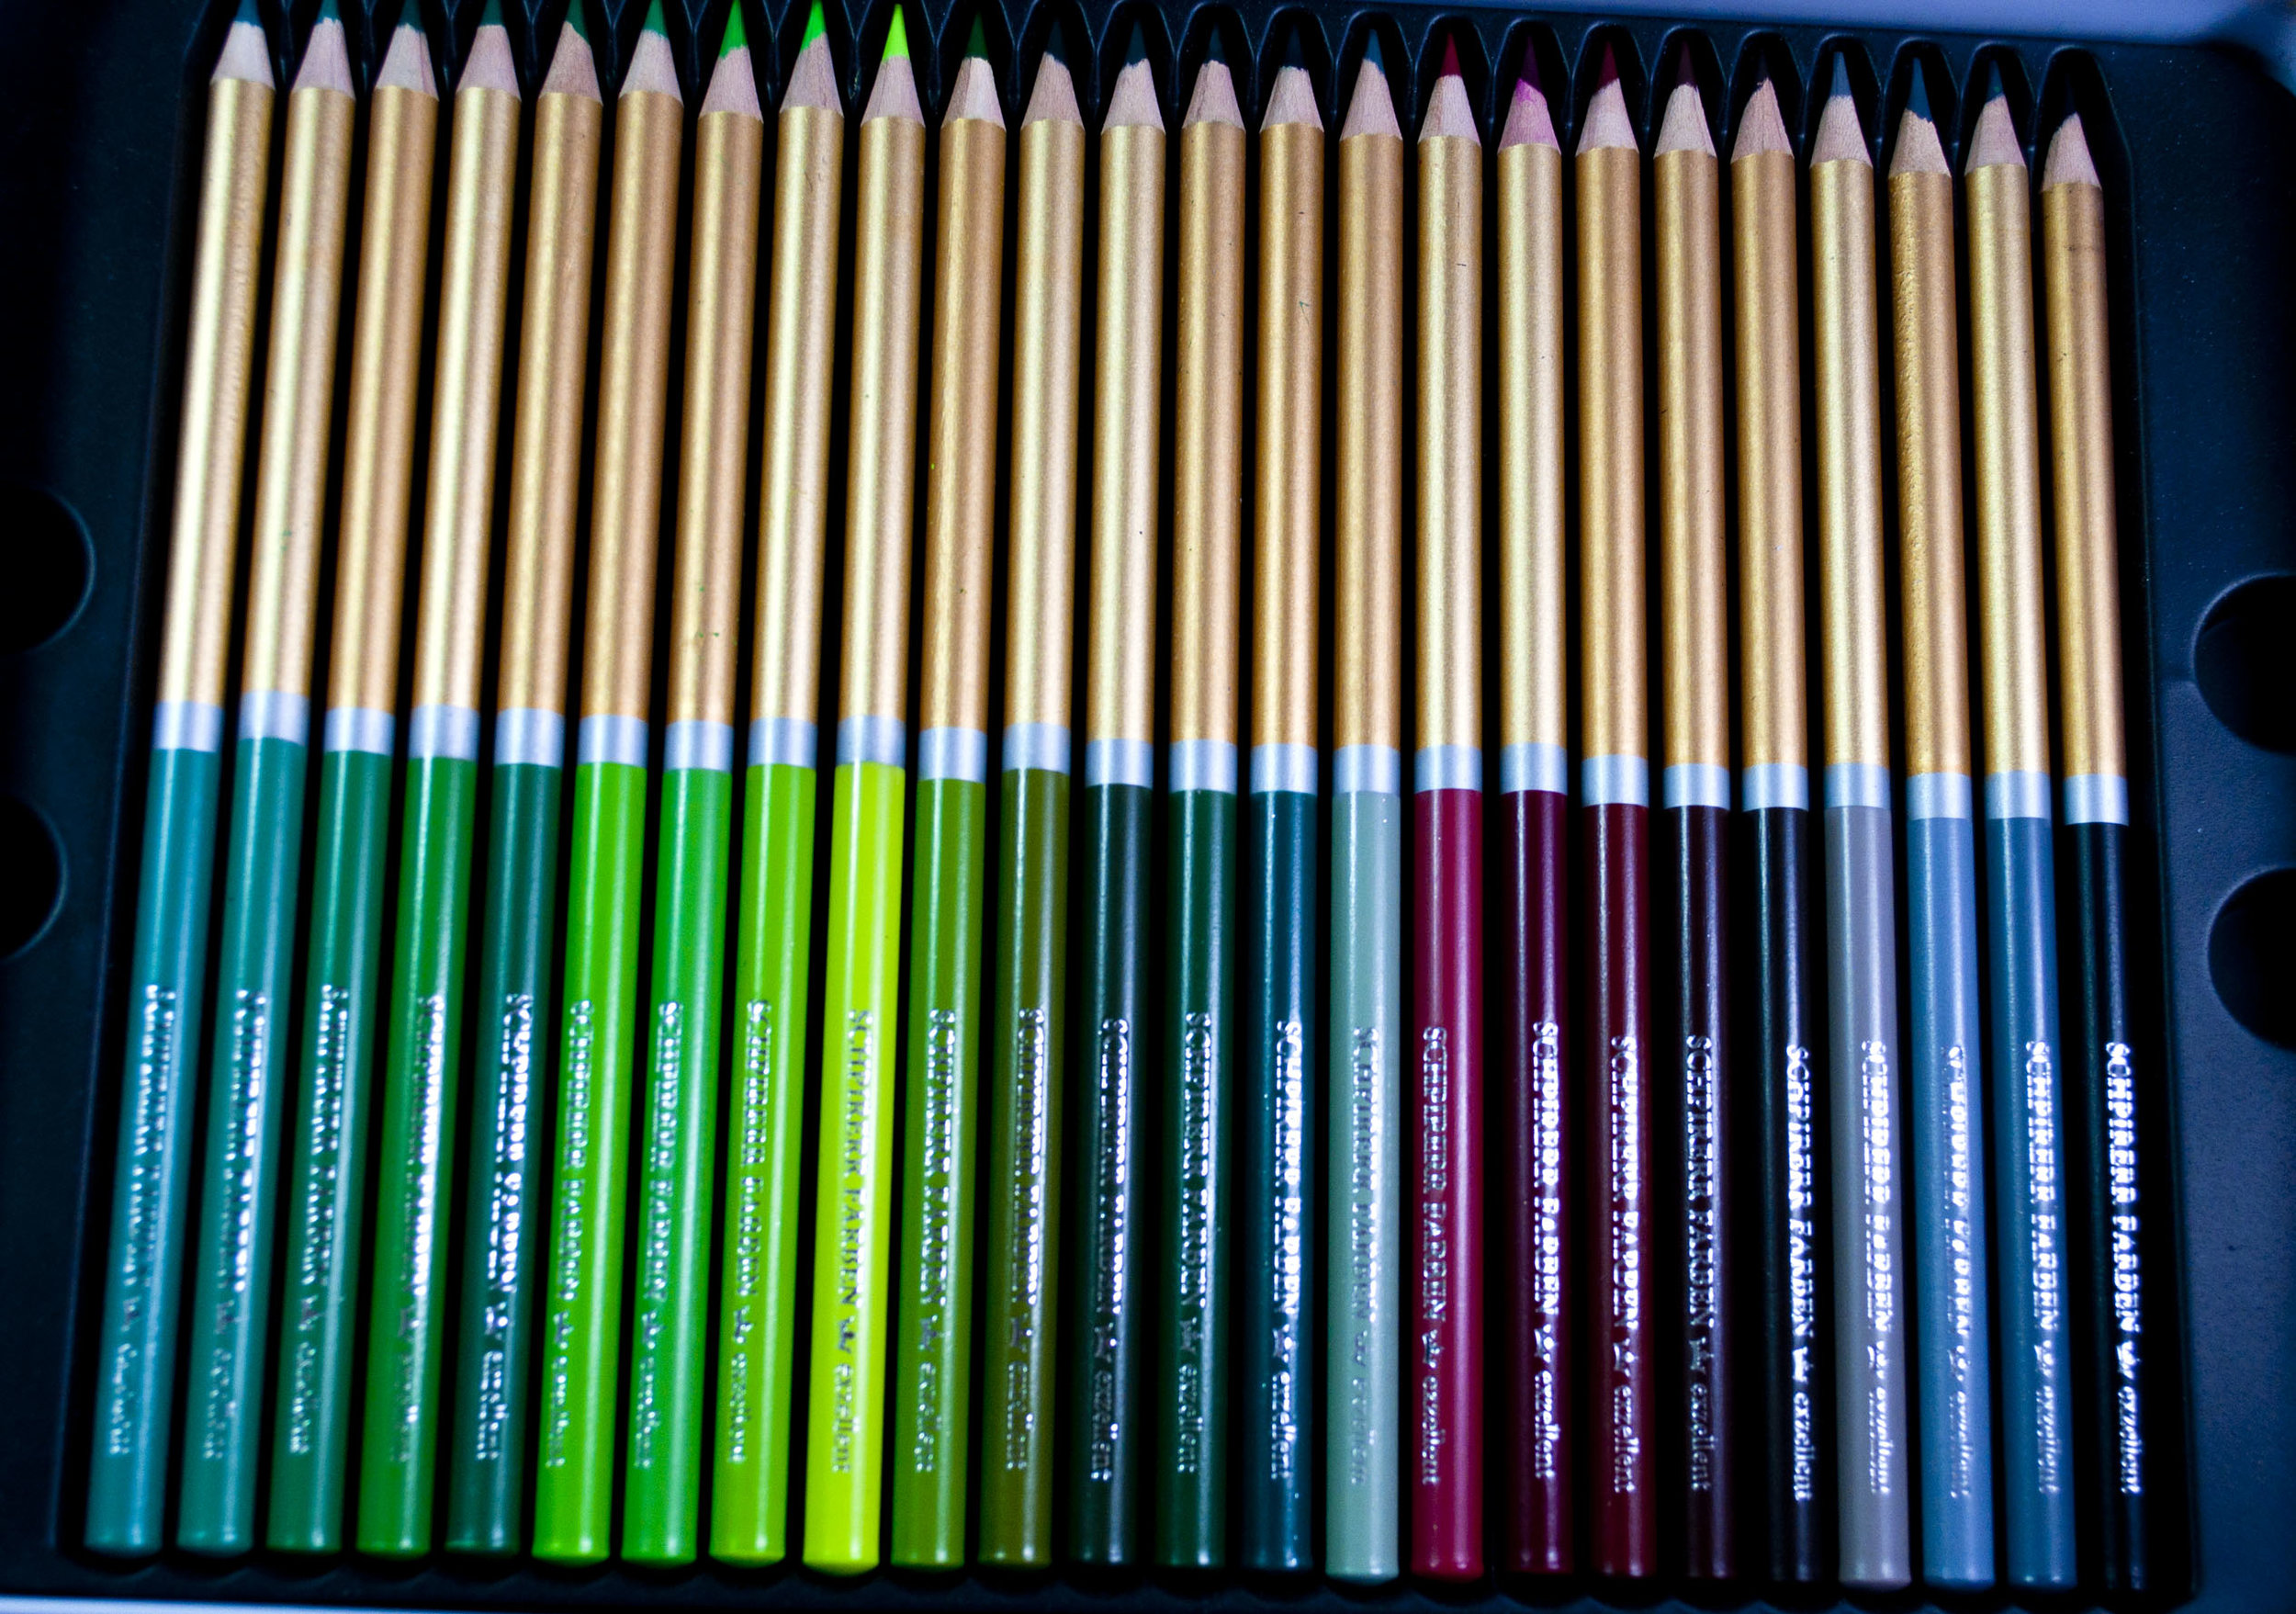 SCHPIREER FARBEN COLORED PENCILS  Review, Swatching, and BLENDING TEST 